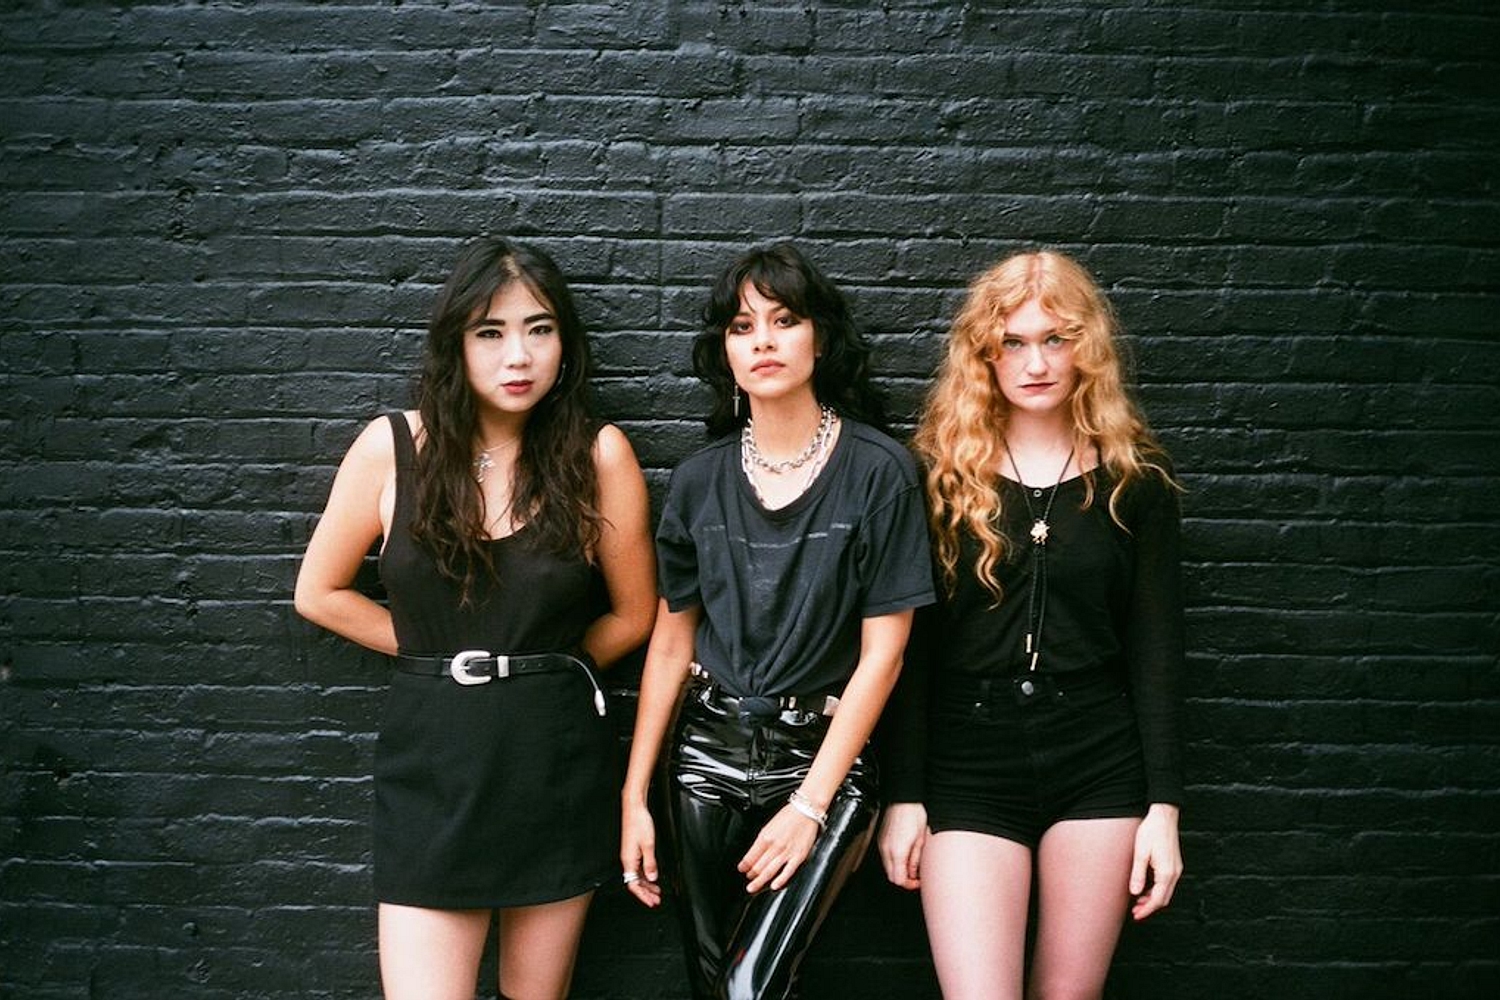 L.A. Witch motor ahead on ‘Drive Your Car’